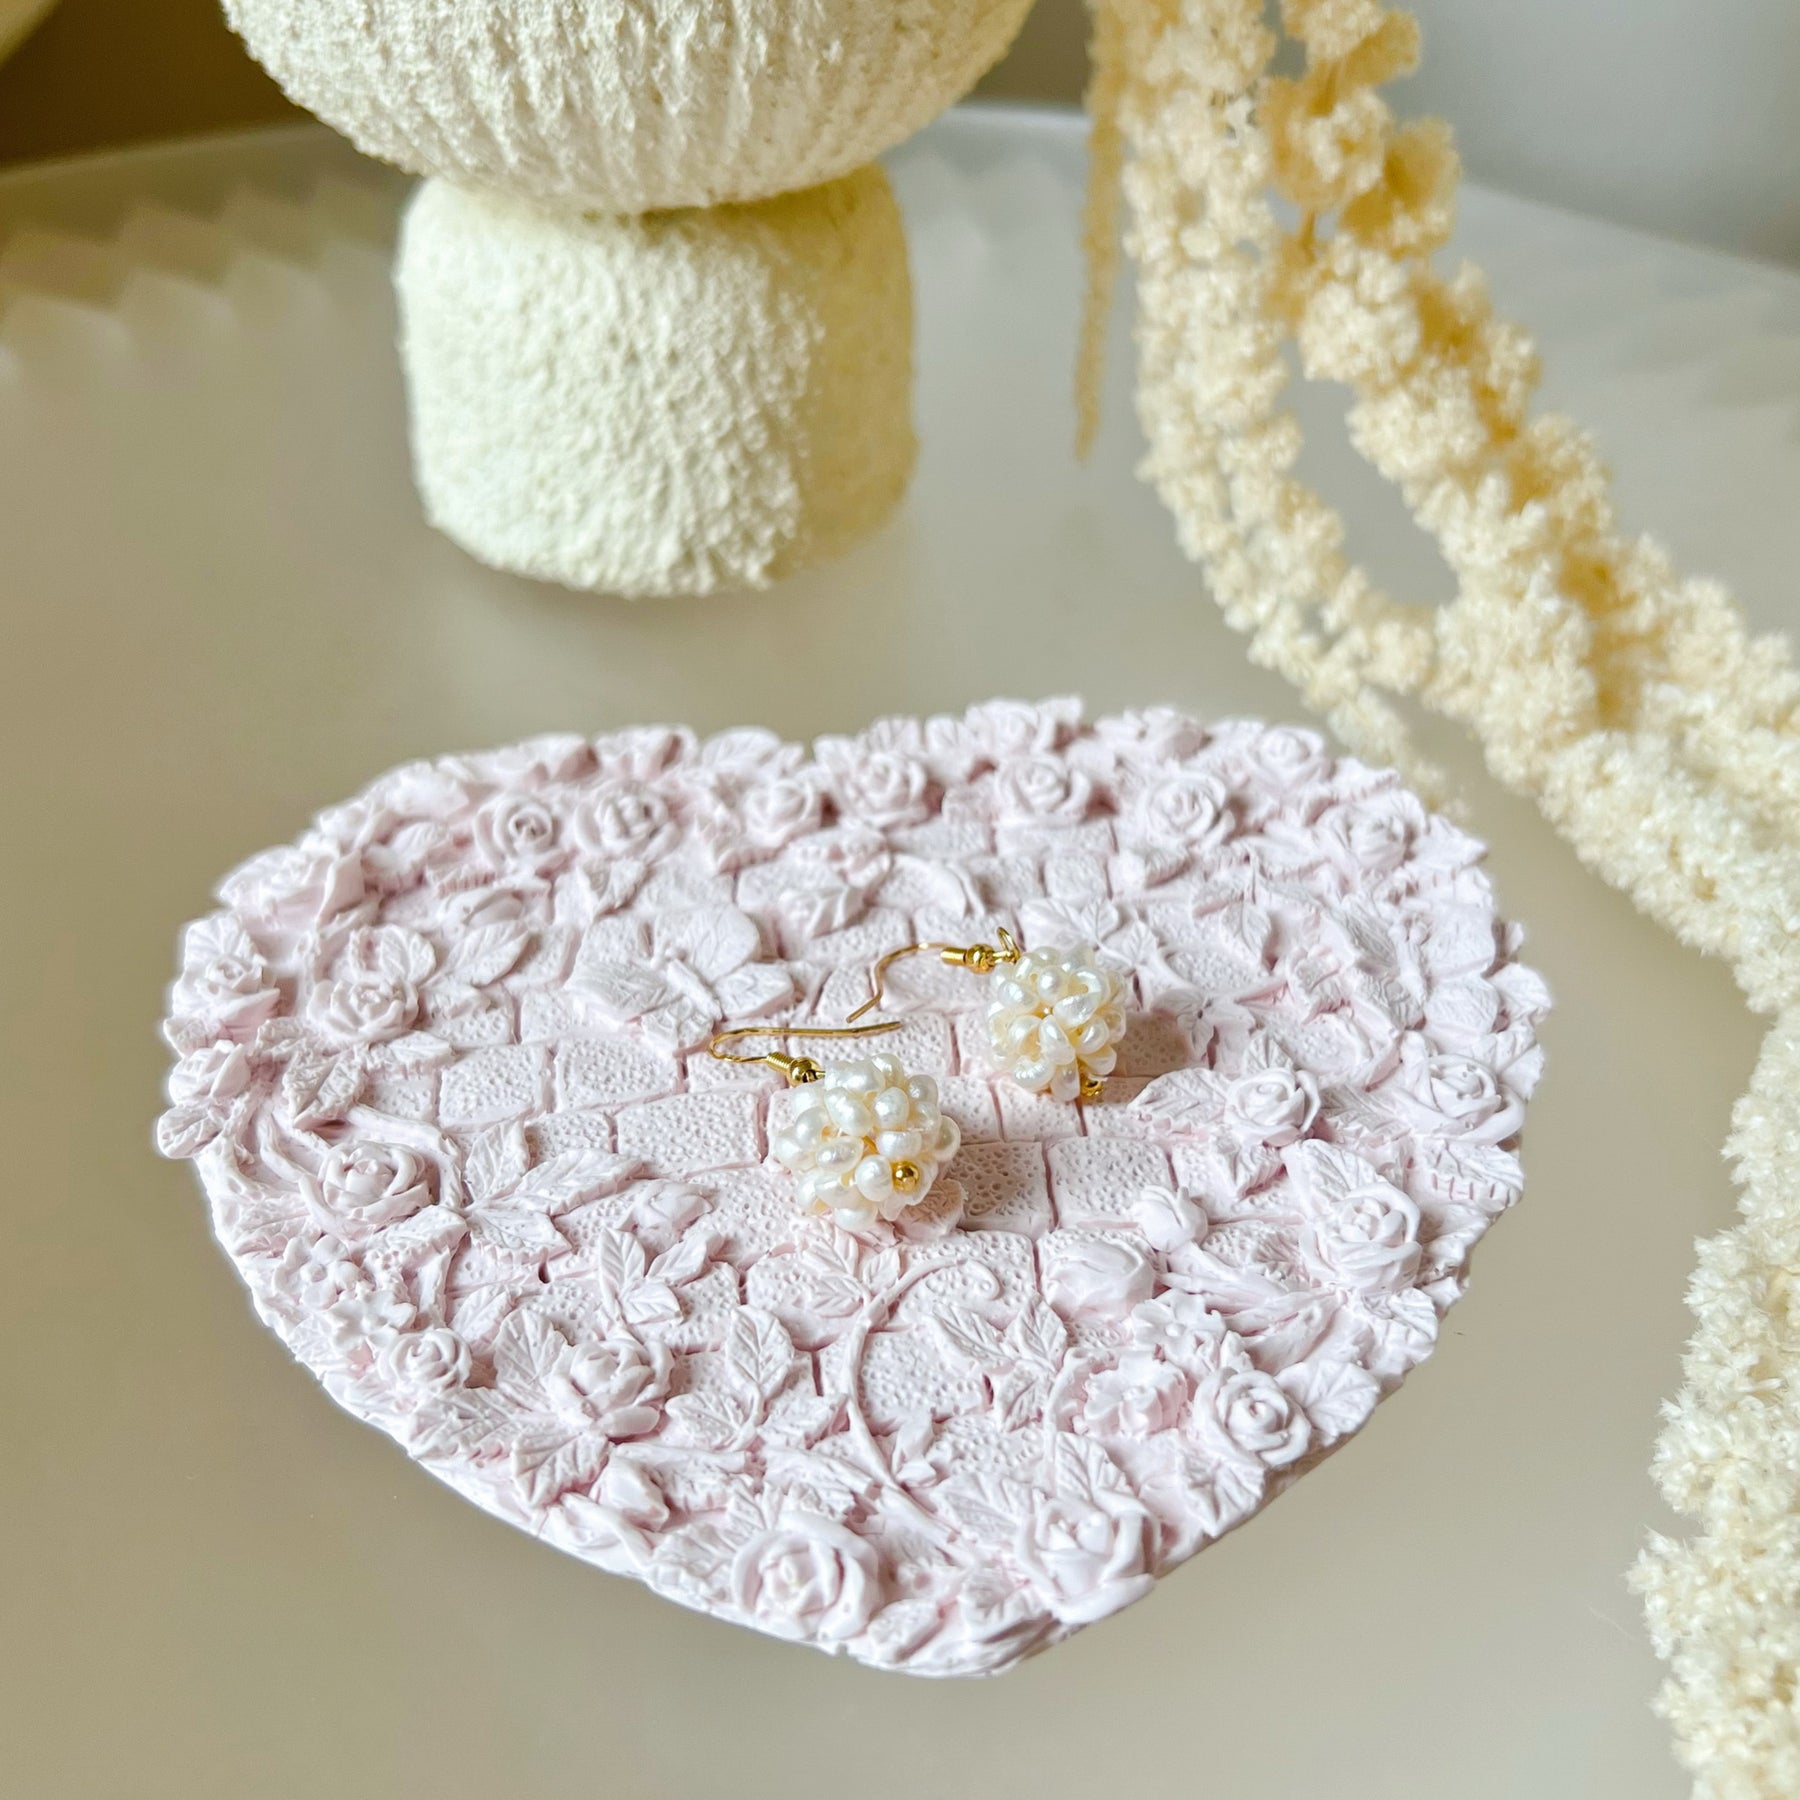 Handcrafted Garden Heart Decorative Tray | Trinket Dish - LMJ Candles